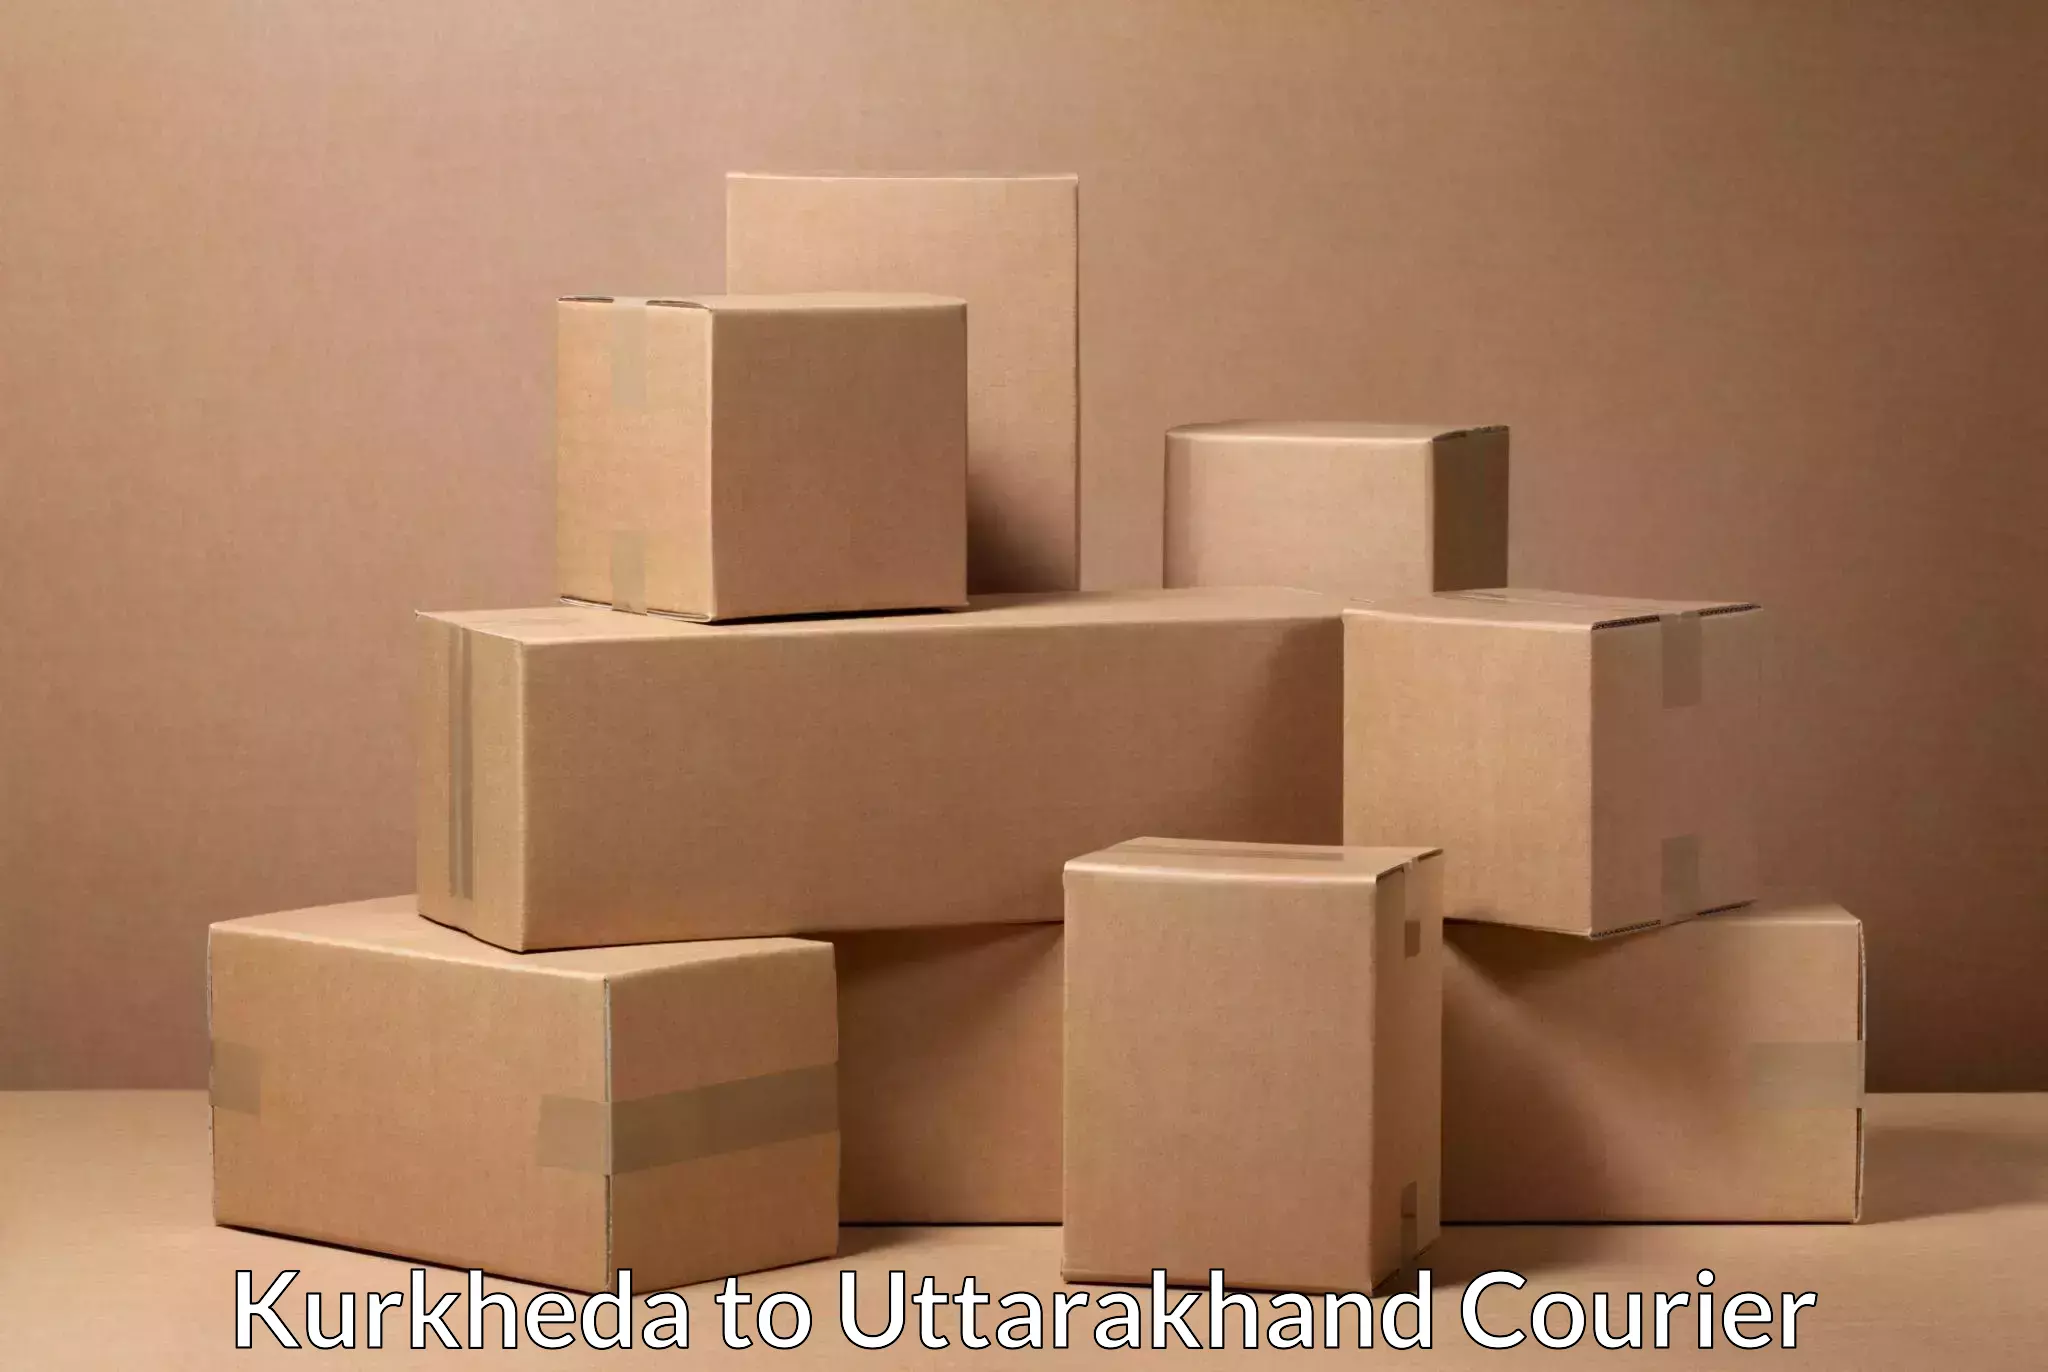 Professional courier services in Kurkheda to Rudraprayag